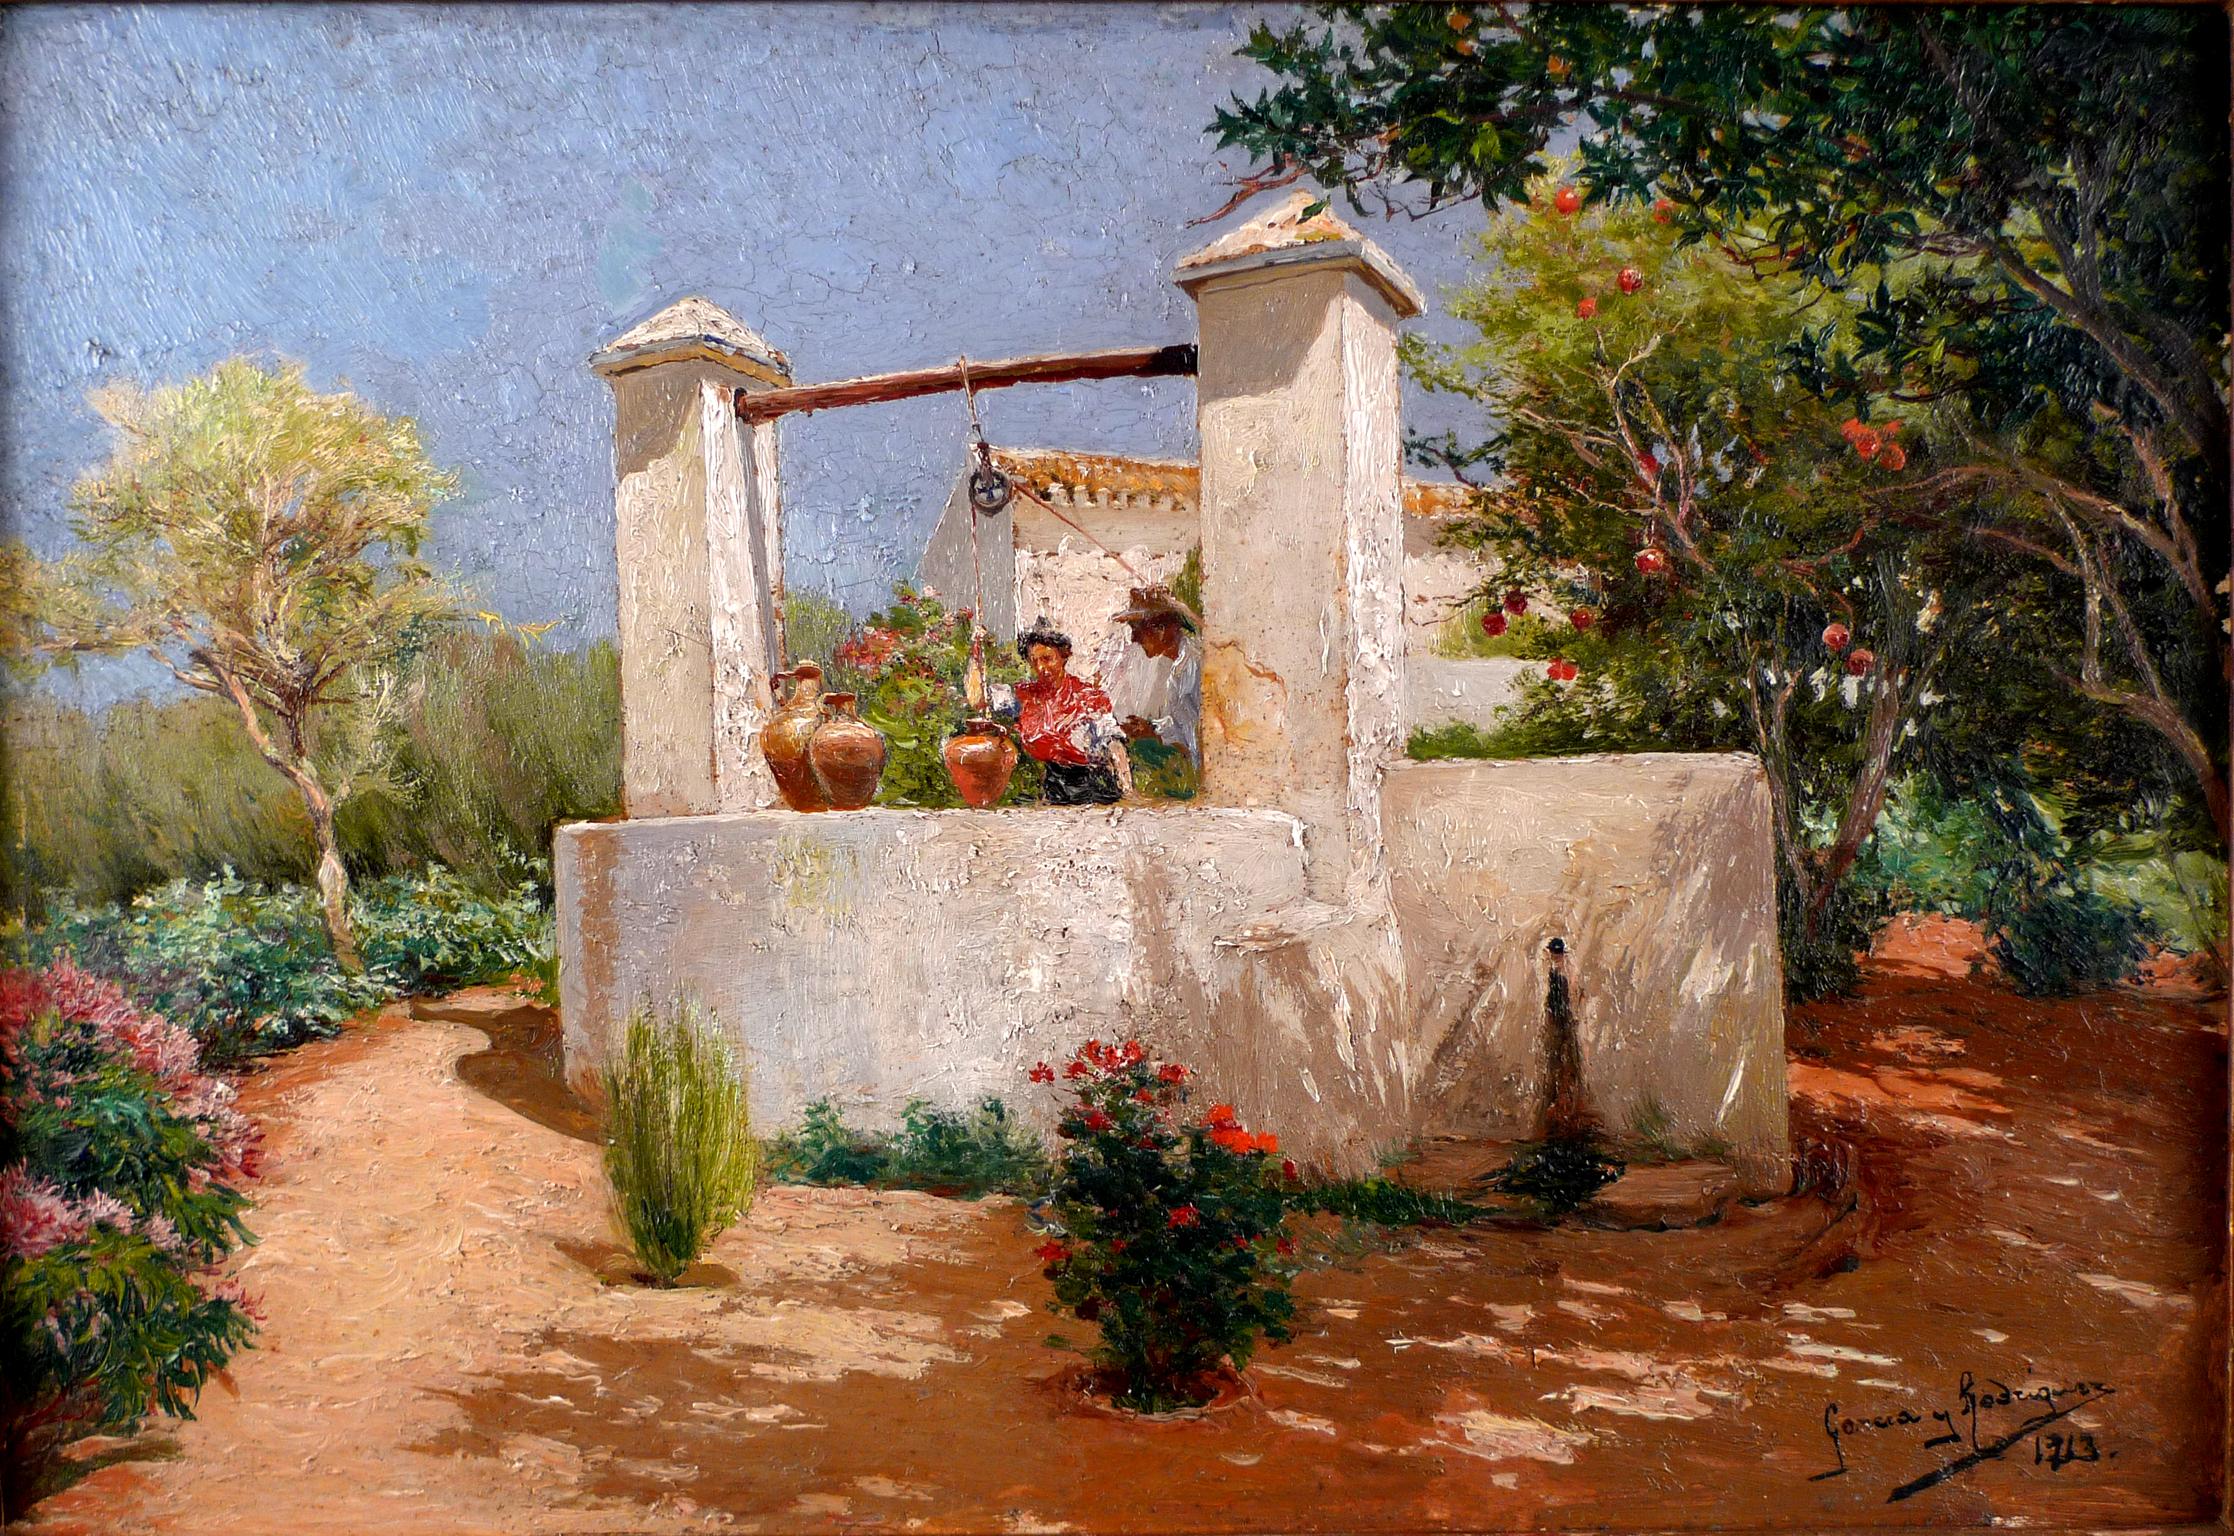 Manuel García y Rodríguez Figurative Painting - "Flirting at the Well", Early 20th Century Oil on Panel by M. García y Rodríguez